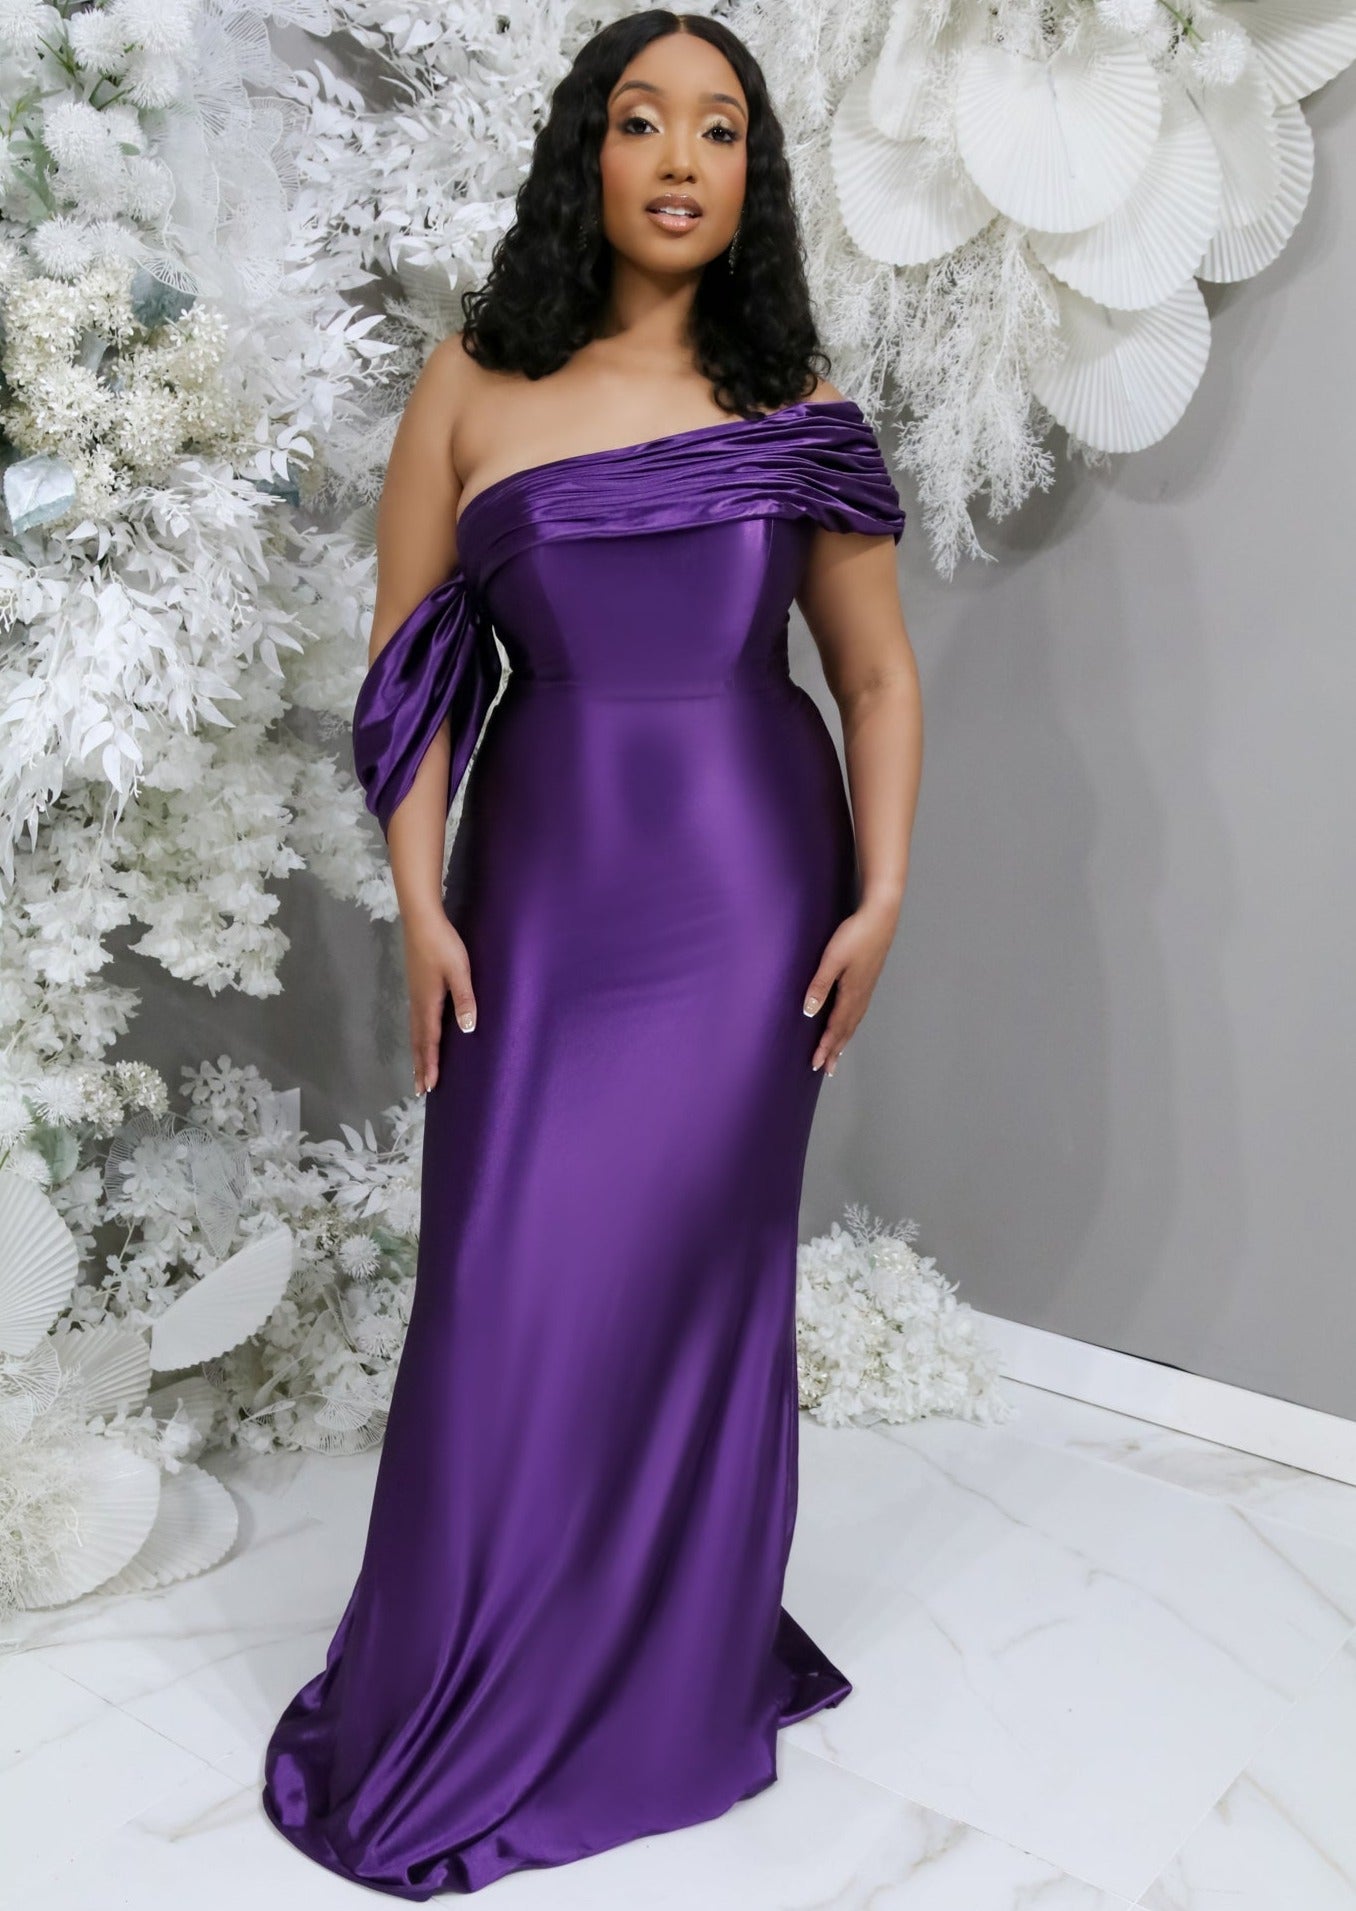 Plus size bridesmaid in asymmetrical fitted stretch satin bridesmaid dress with draping across the neckline continuing to an off-the-shoulder strap. This style is designed to flatter and complement all body types. Shown in jewel tone on a black curvy model.